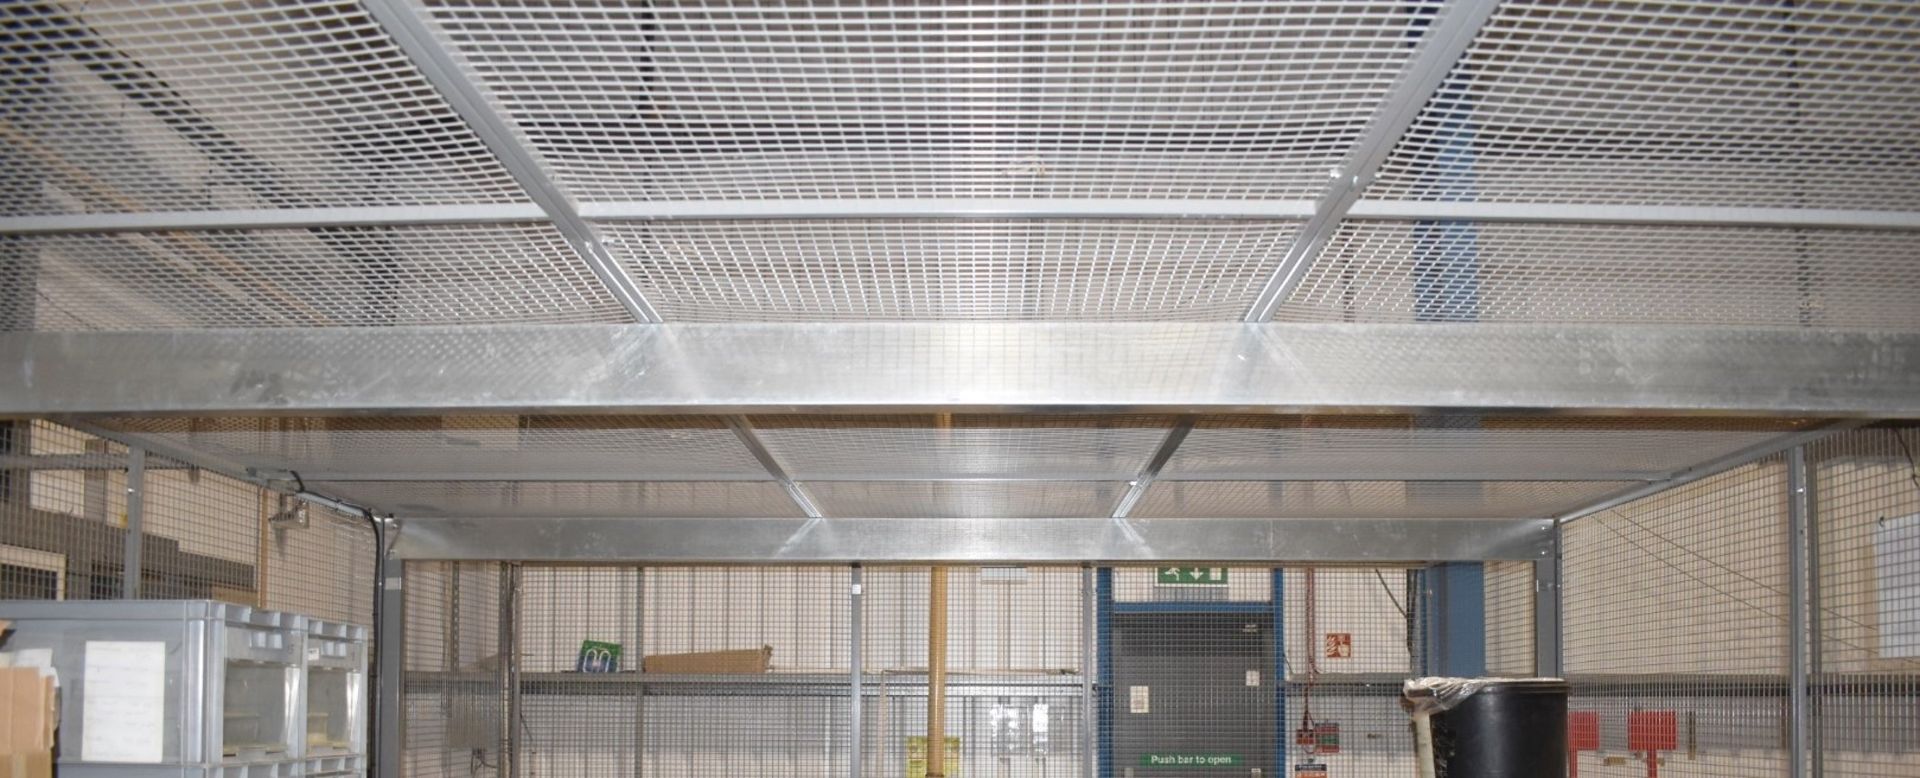 1 x Security Cage Enclosure For Warehouses - Ideal For Storing High-Value Stock or Hazardous Goods - - Image 11 of 12